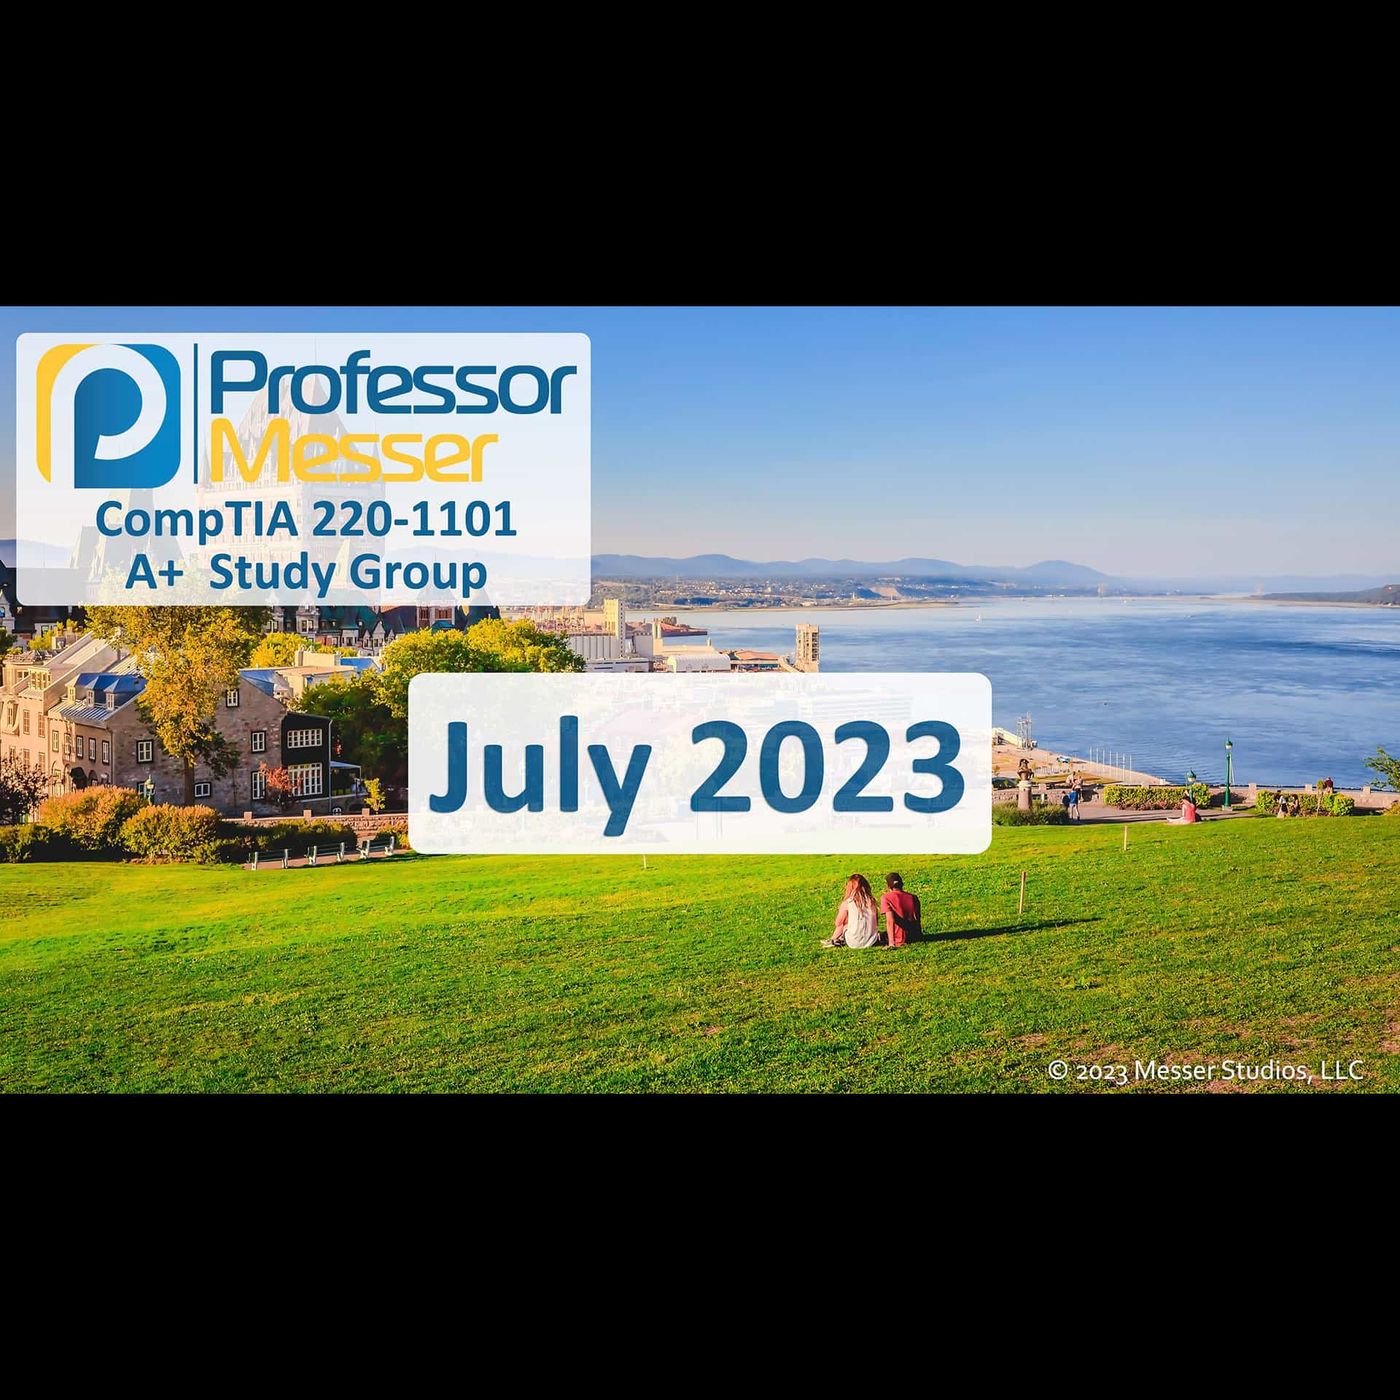 Professor Messer's CompTIA 220-1101 A+ Study Group After Show - July 2023